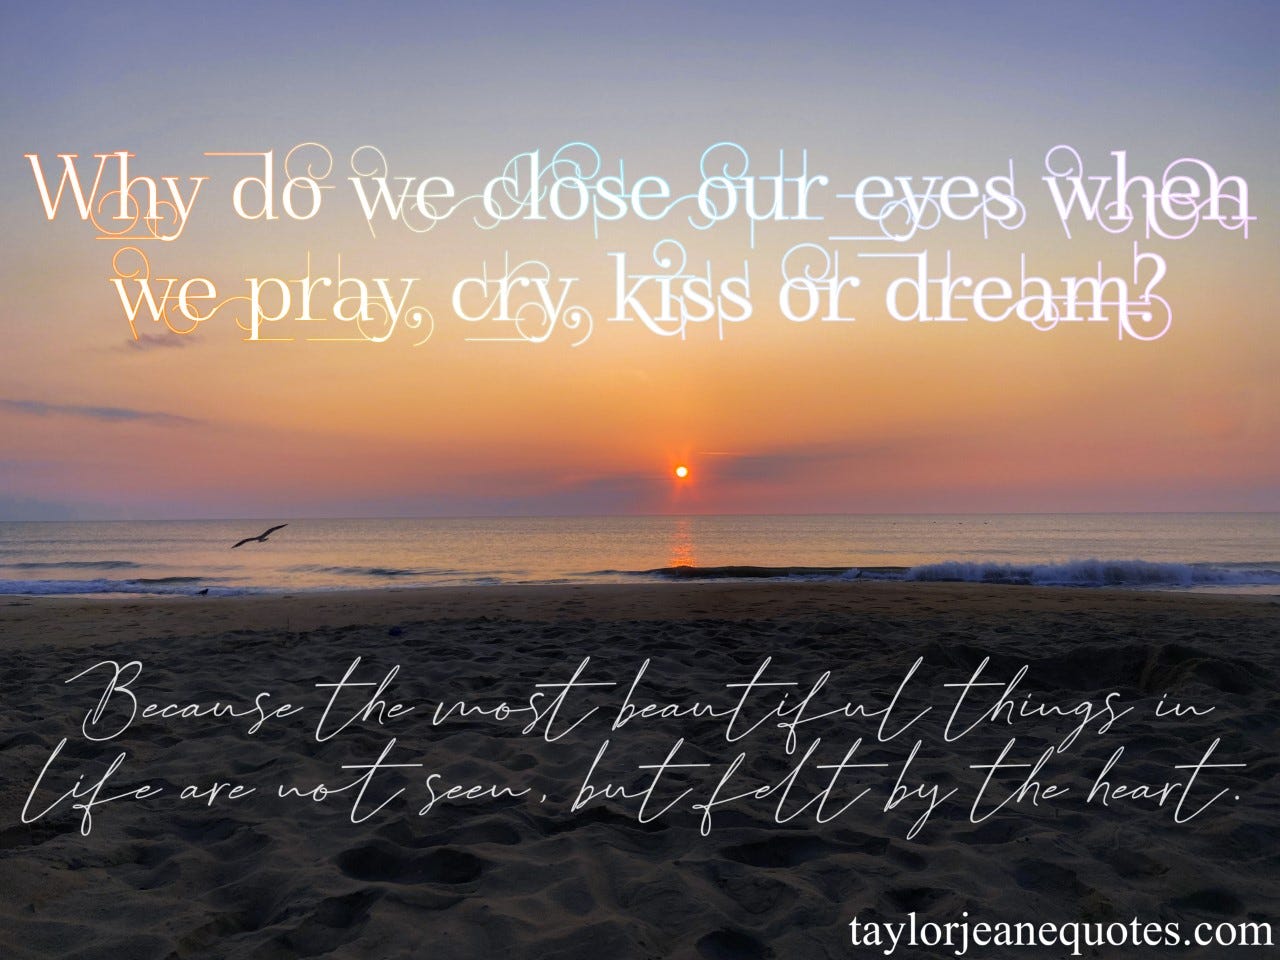 taylor jeane quotes, taylor jeane, taylor wilson, inspirational quote of the day, uplifting quotes of the day, close your eyes quotes, heart quotes, feelings quotes, powerful quotes, touching quotes, sentimental quotes, love quotes, sight quotes, beach, sunrise, sunset, ocean, outer banks, north carolina beach, beautiful quotes